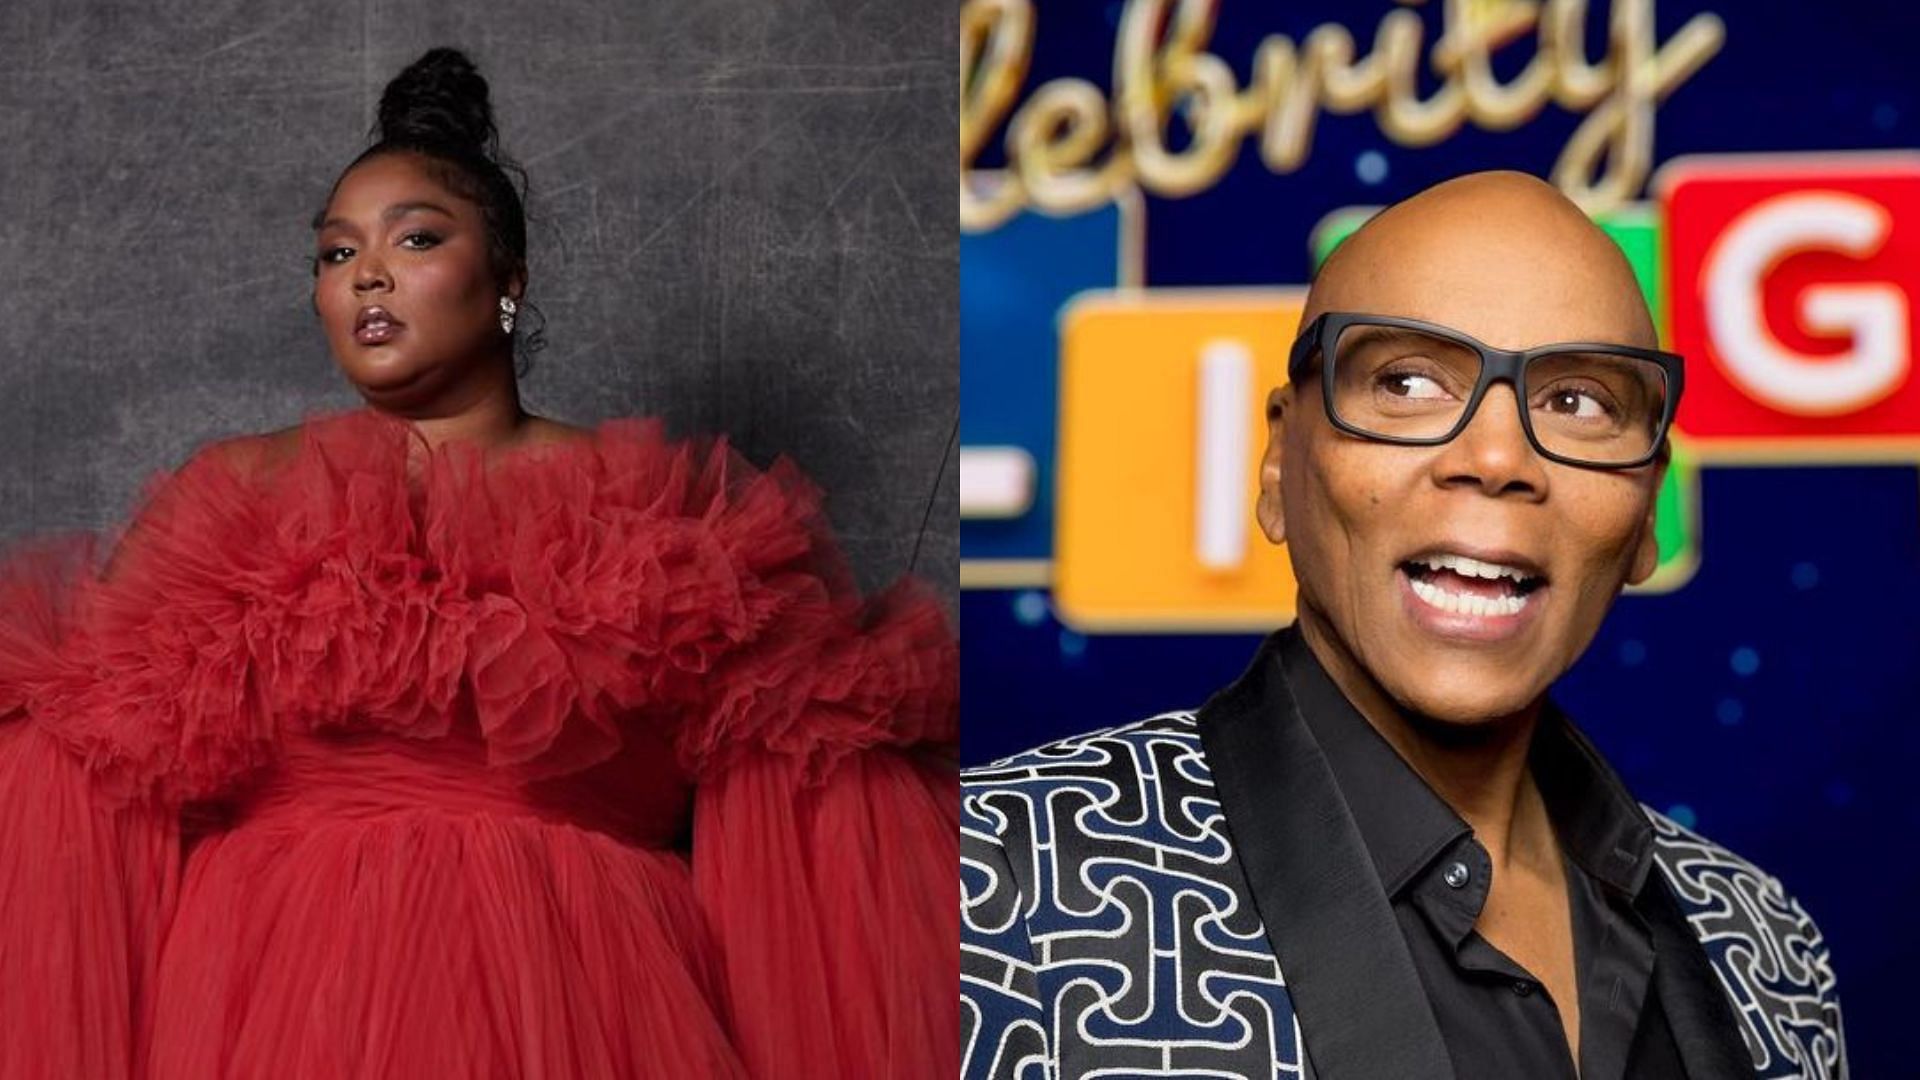 Lizzo beats RuPaul Charles on Emmys 2022